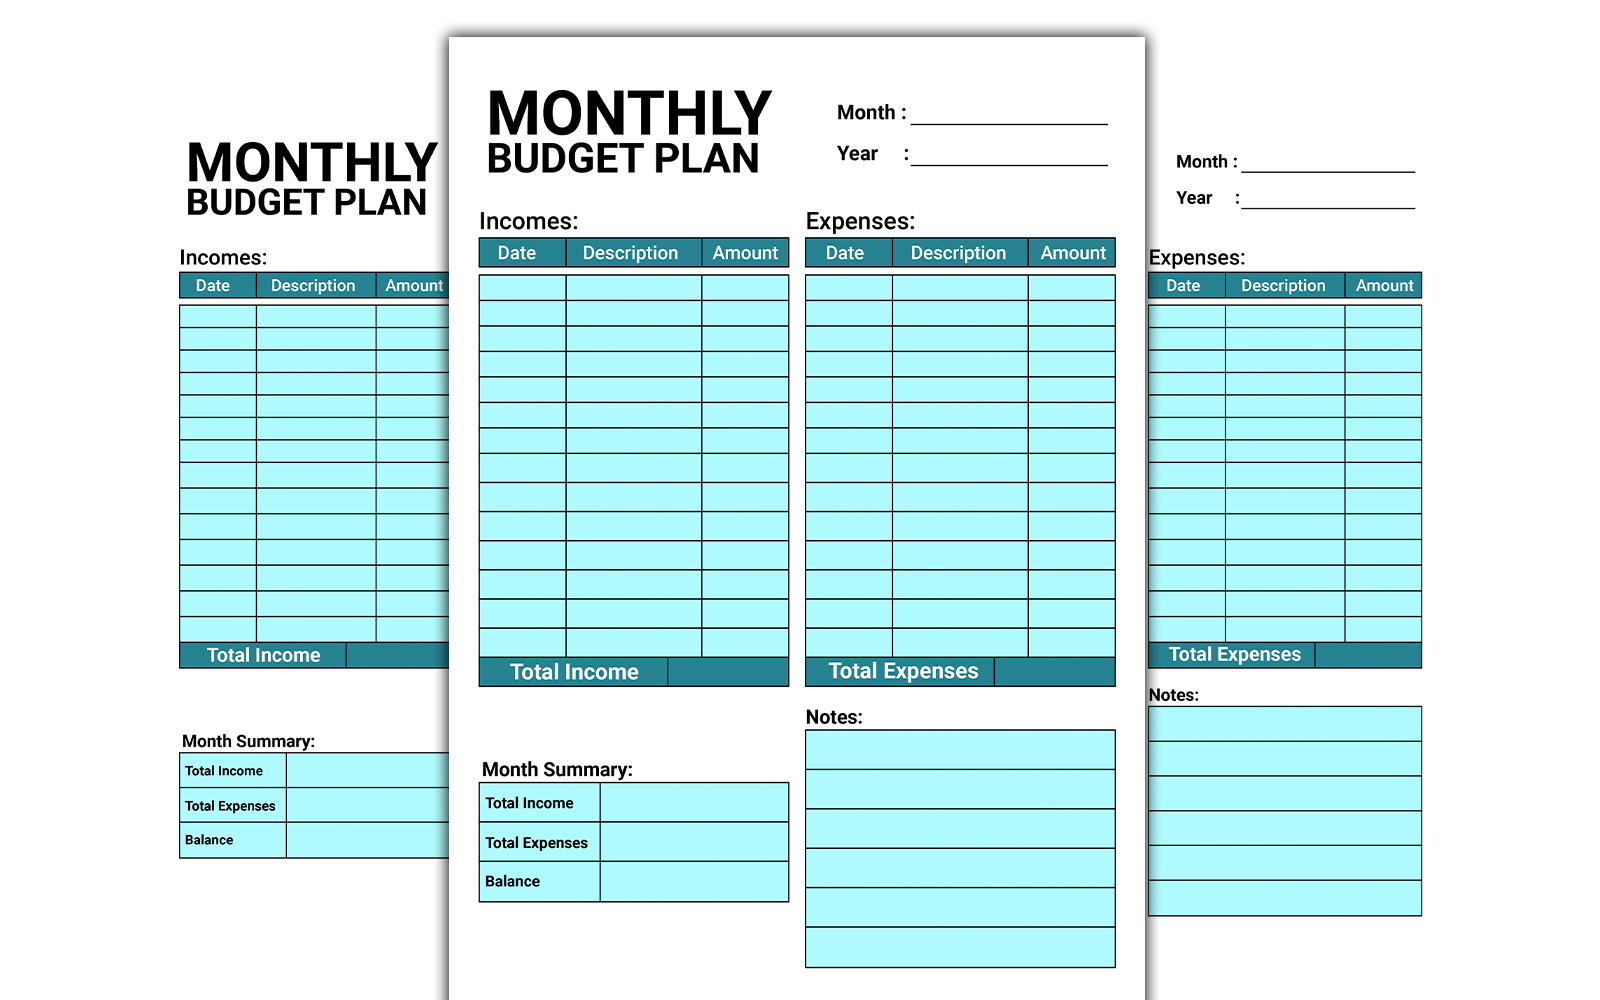 Weekly Planner Easy To Use and Ready To Use Template